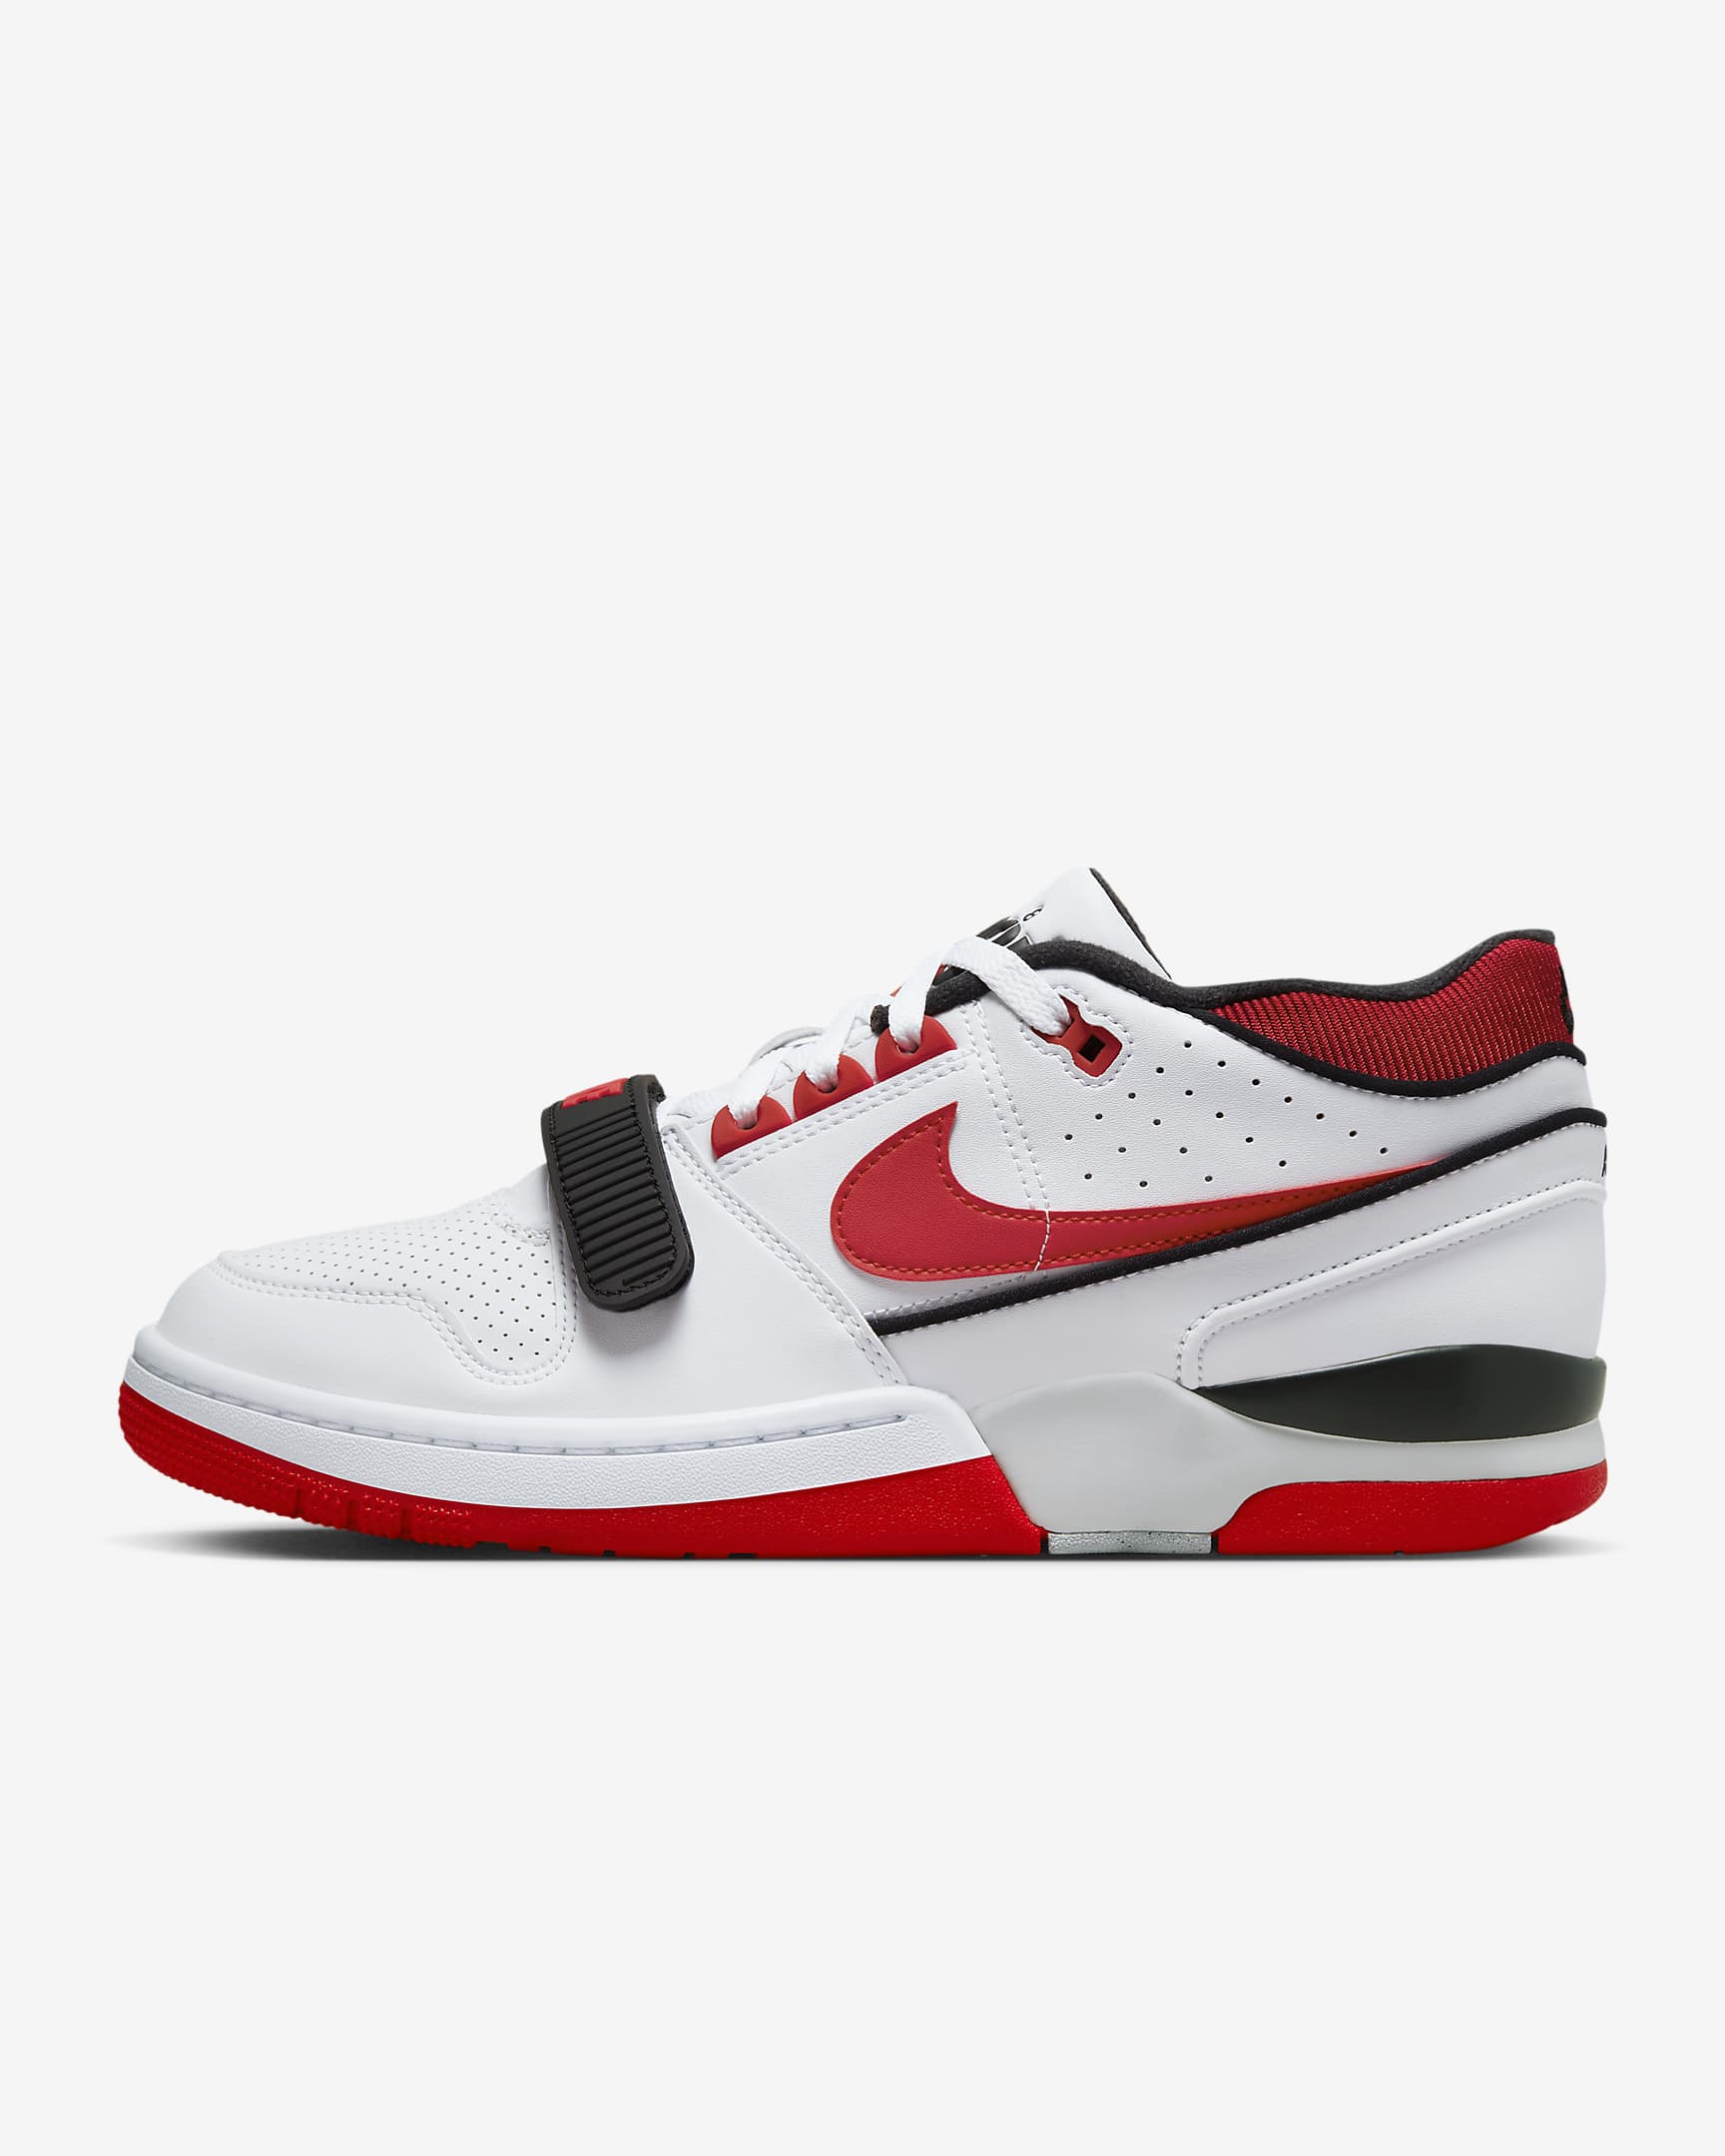 Nike Air Alpha Force 88 x Billie Men's Shoes - White/Neutral Grey/Fire Red